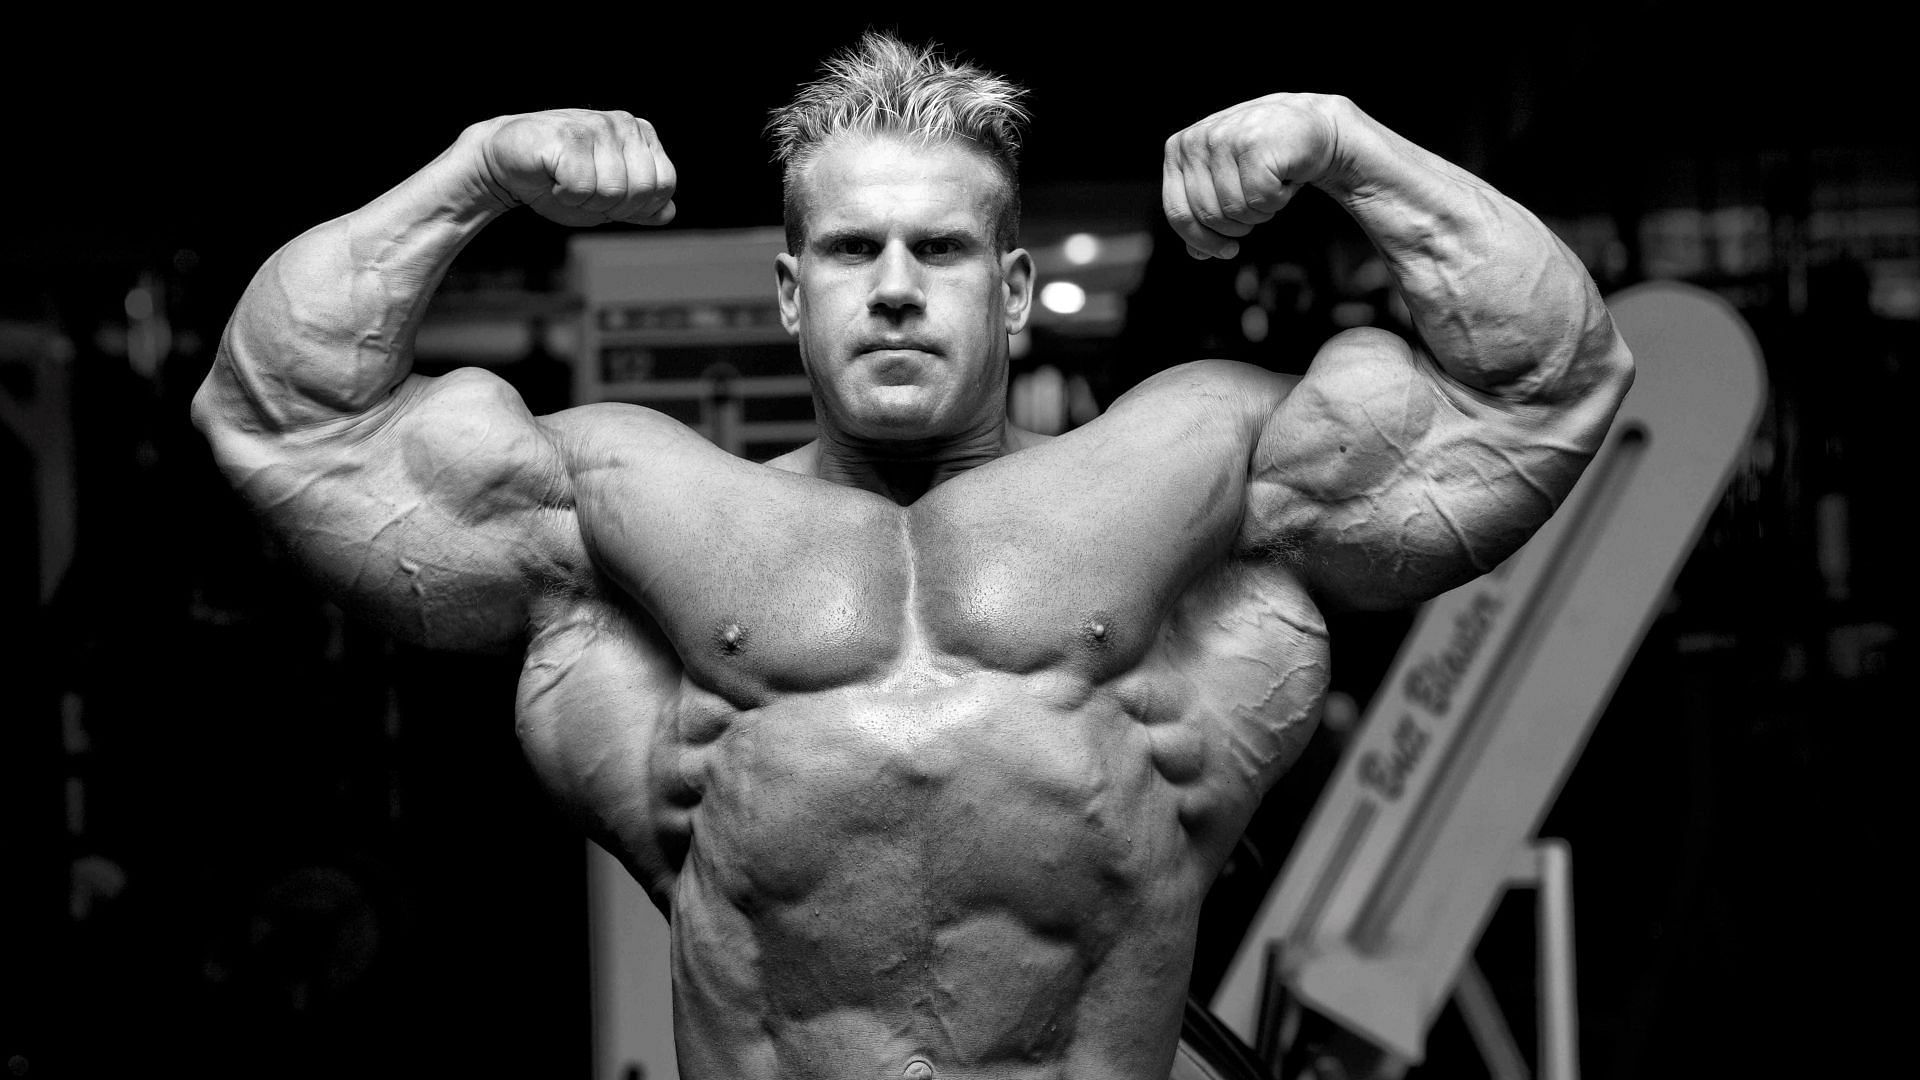 4-Time Mr. Olympia Jay Cutler Shares His Top Three Exercises For